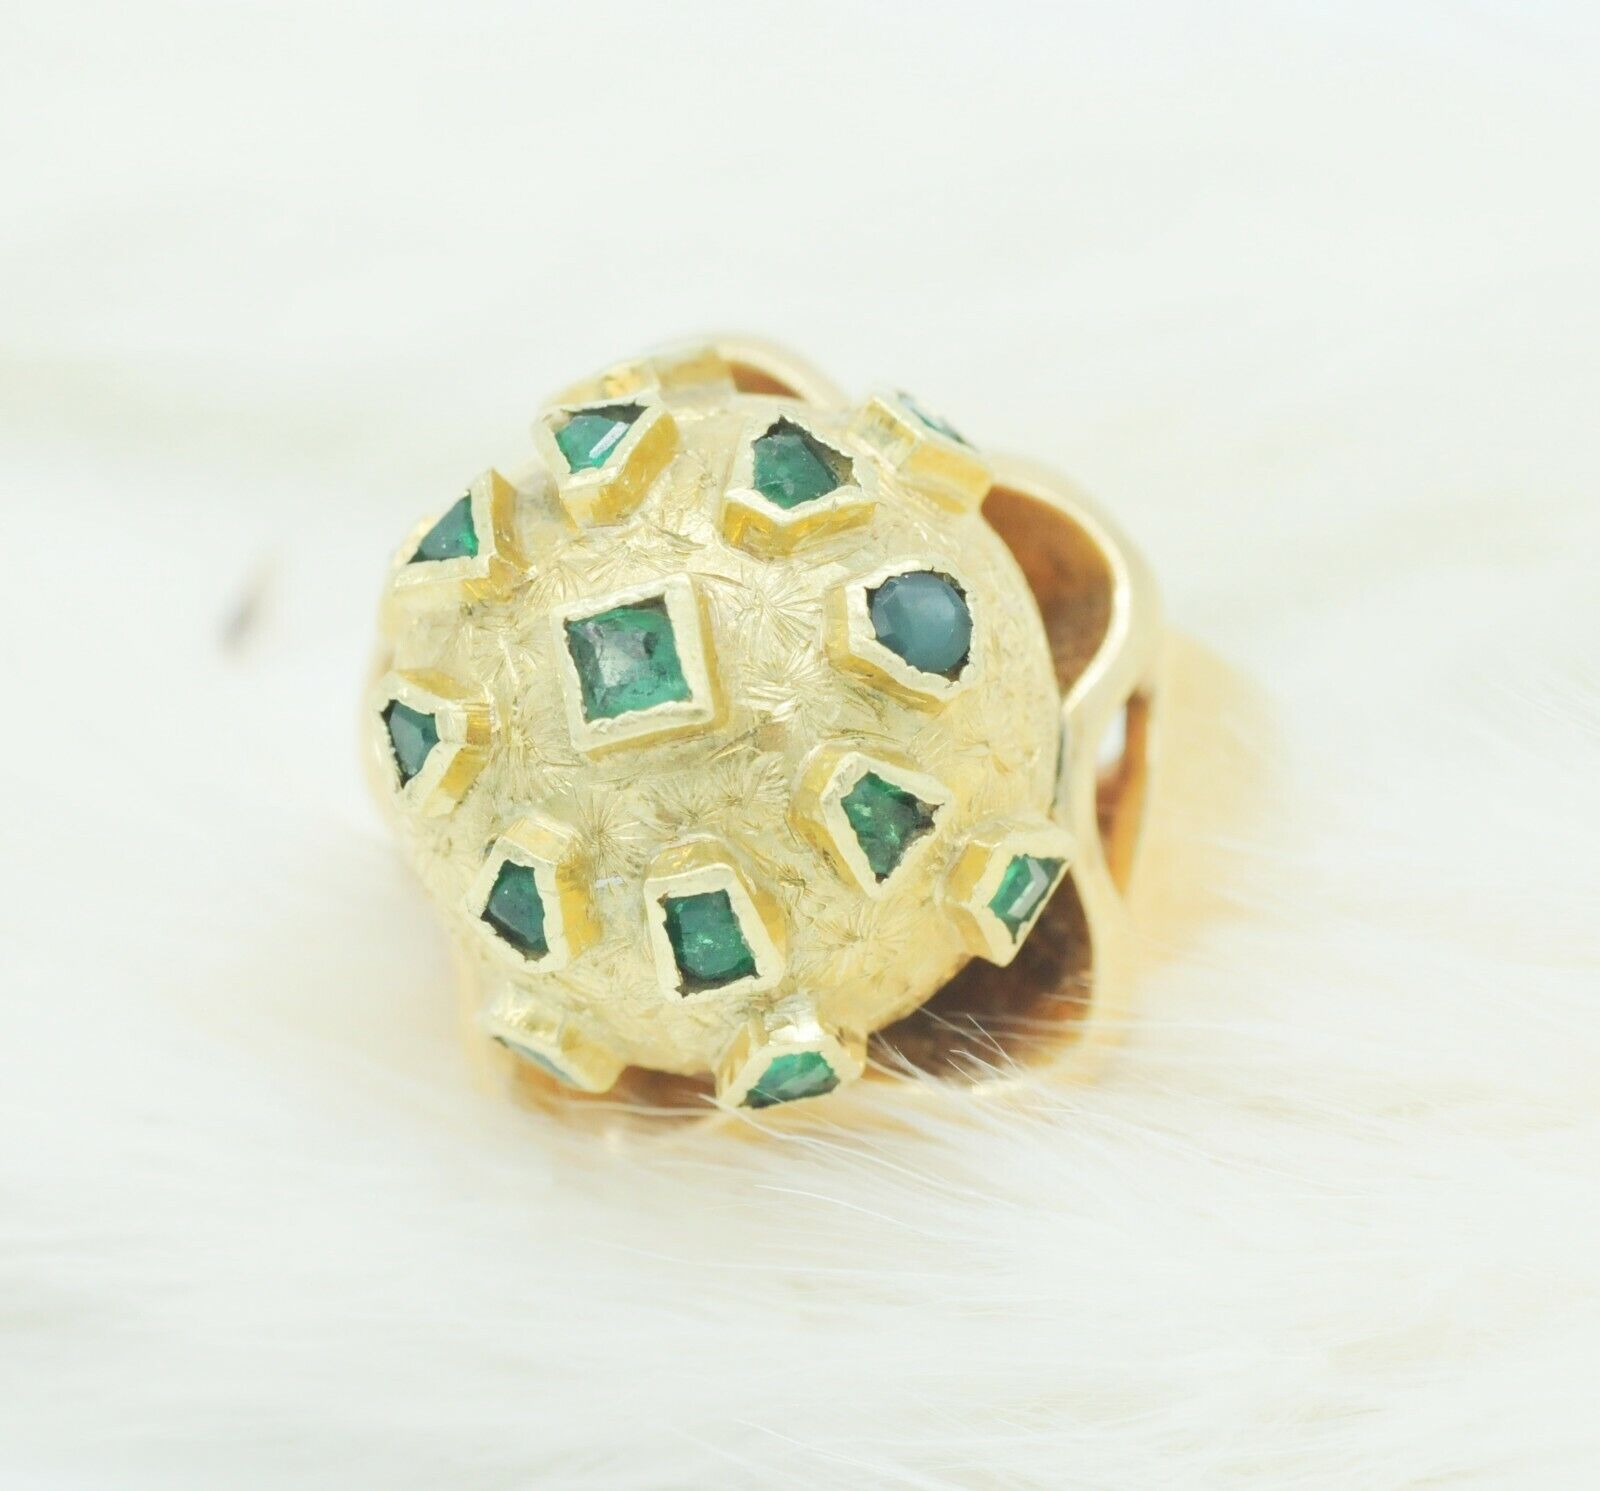 Vintage Ball Cluster Ring With Emerald Gemstone in 14k Yellow Gold 8us